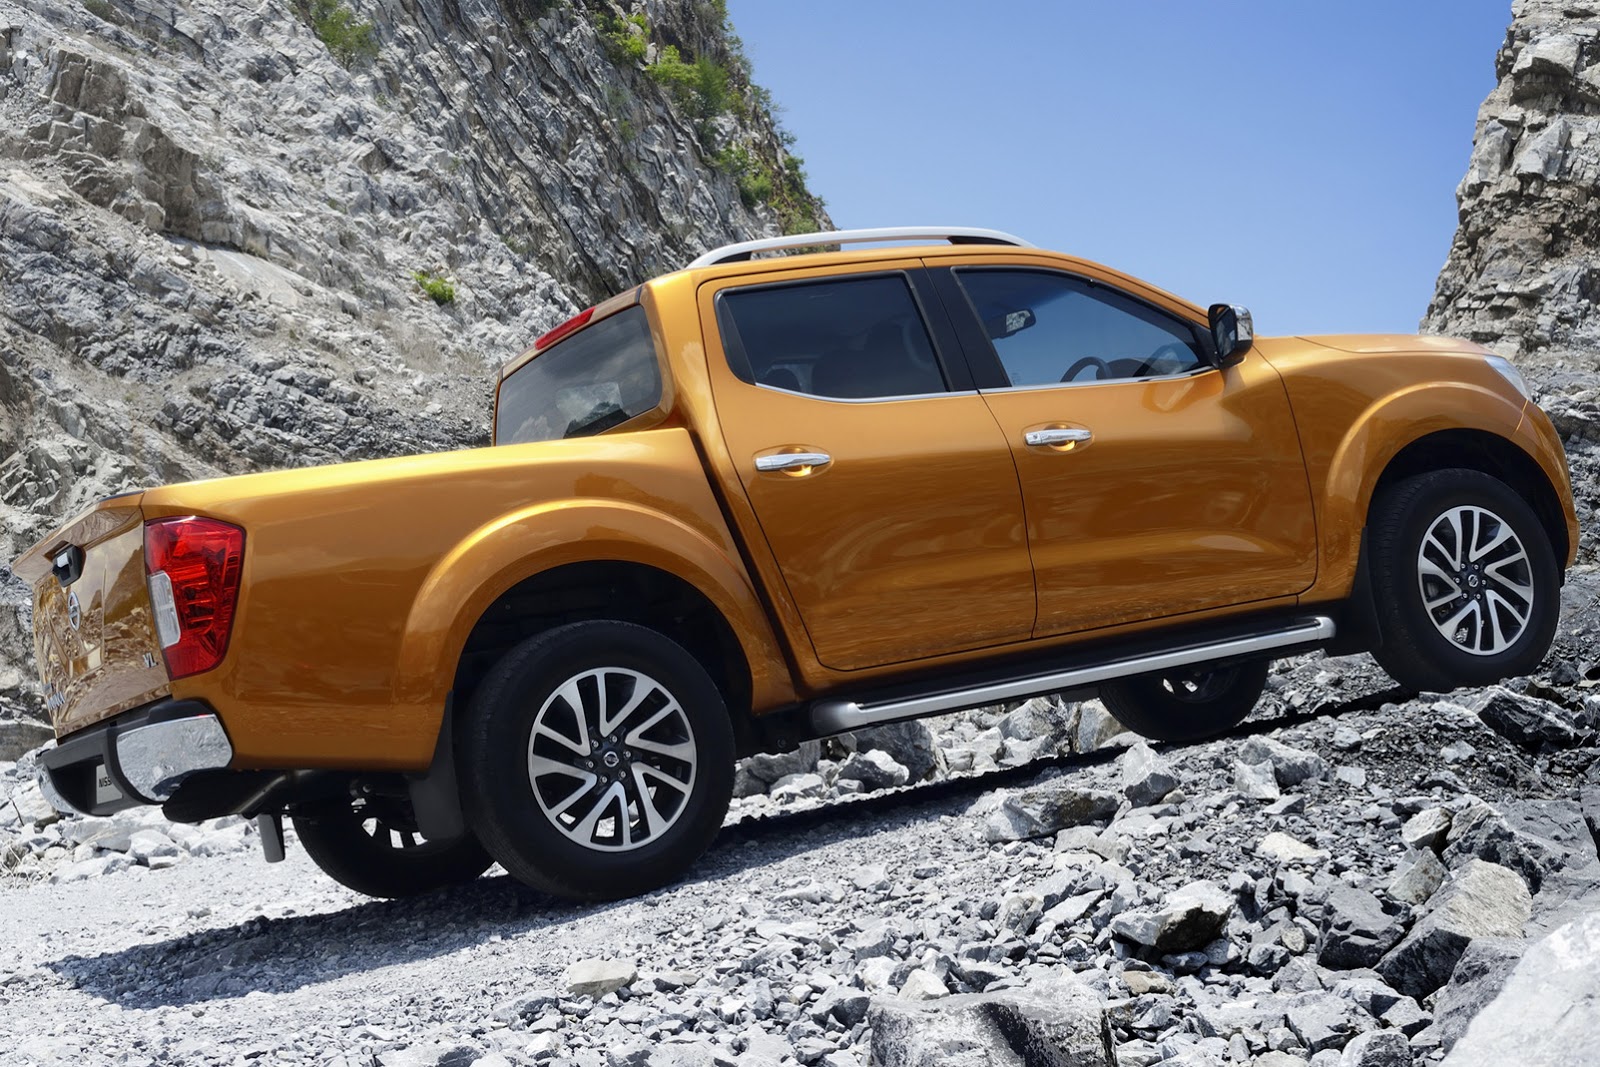 Confirmed for 2016, Will Be Based on Nissan Navara - autoevolution